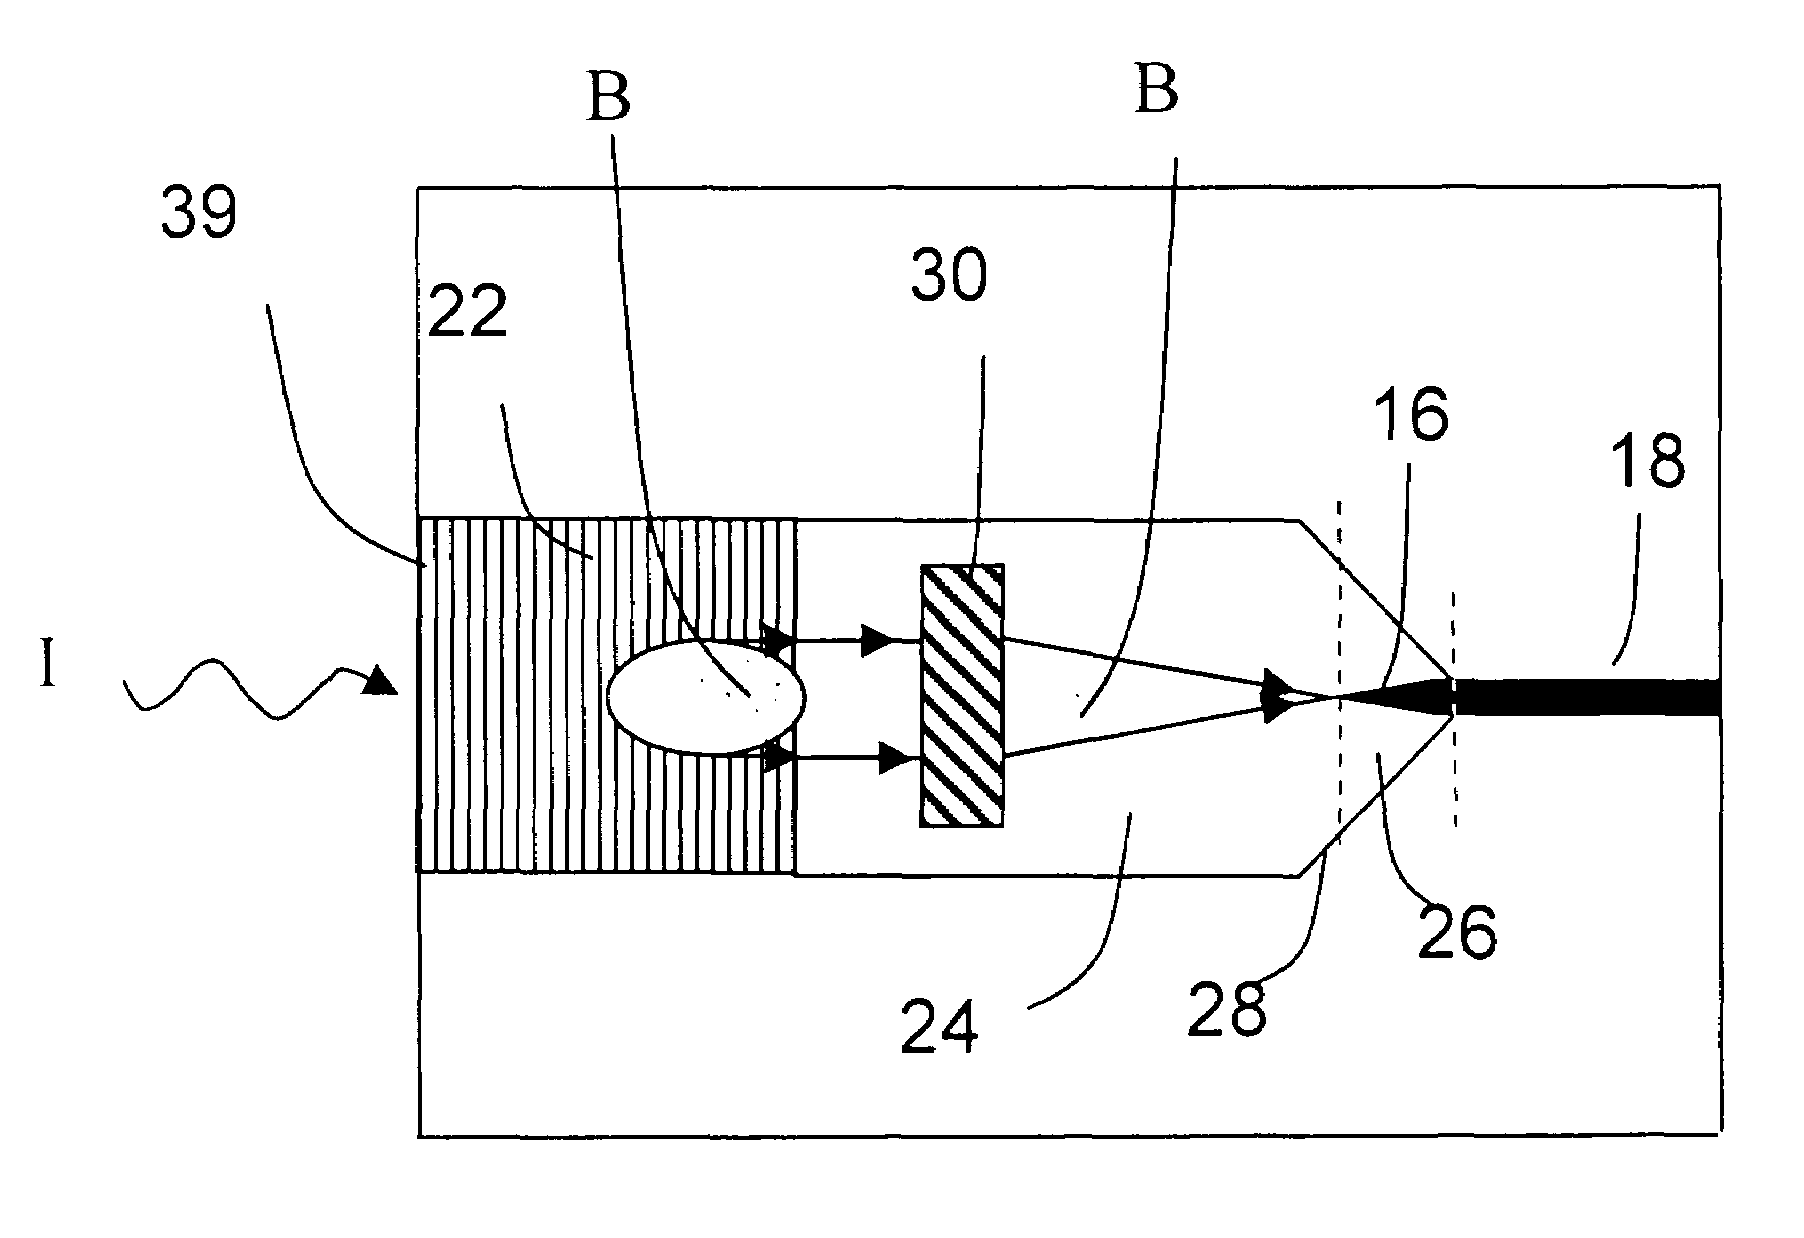 Silicon nanotaper couplers and mode-matching devices